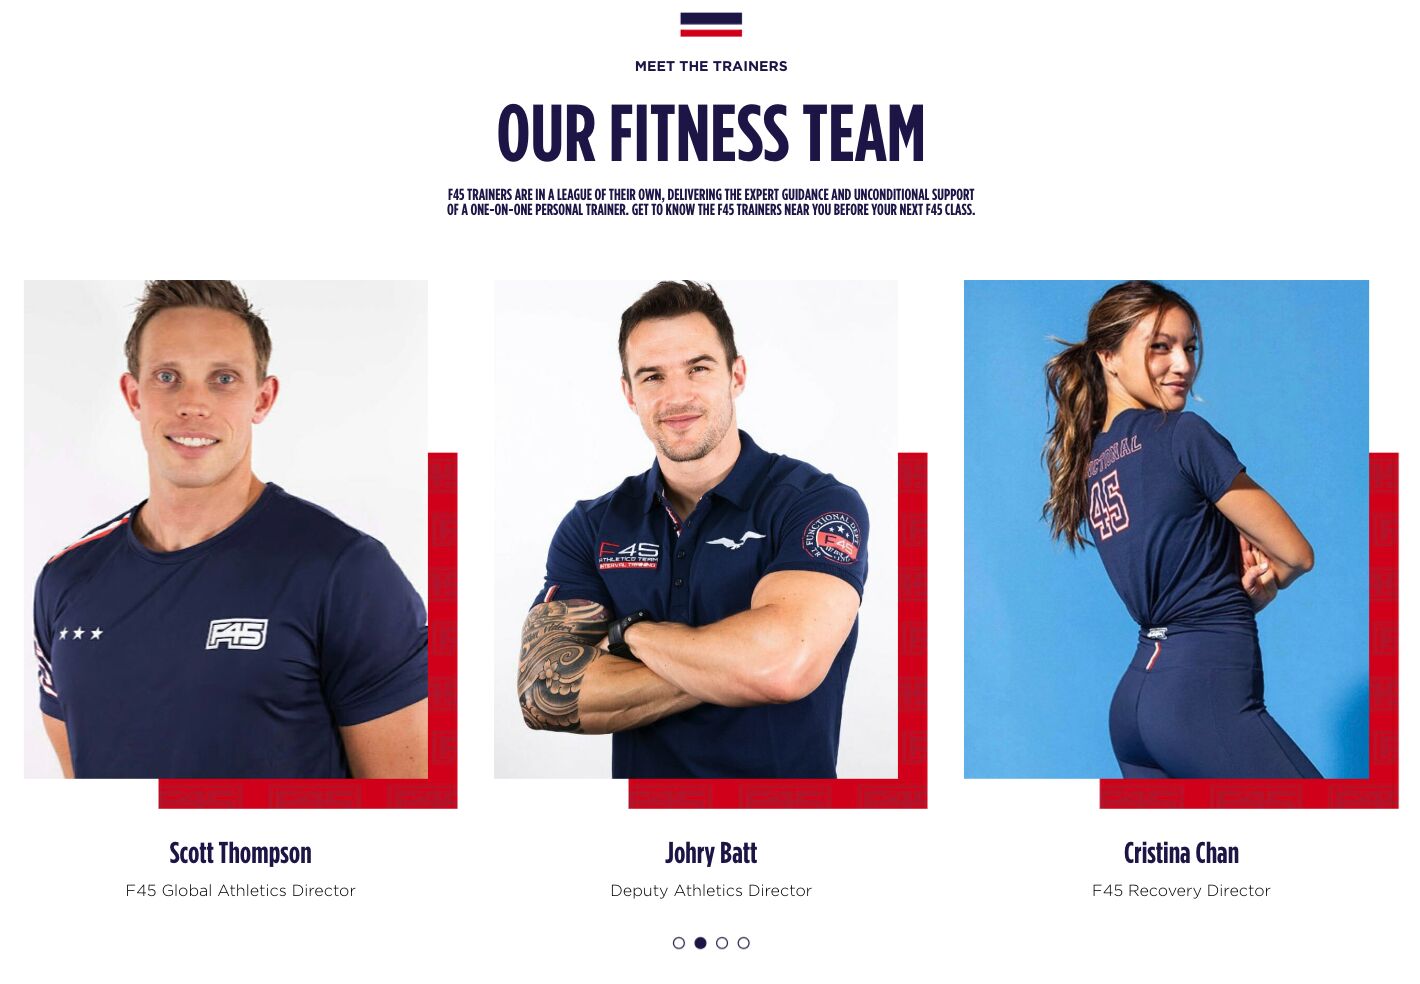 f45s-team-at-the-pooler-location Franchise SEO: Local and National Growth Strategies for Franchises